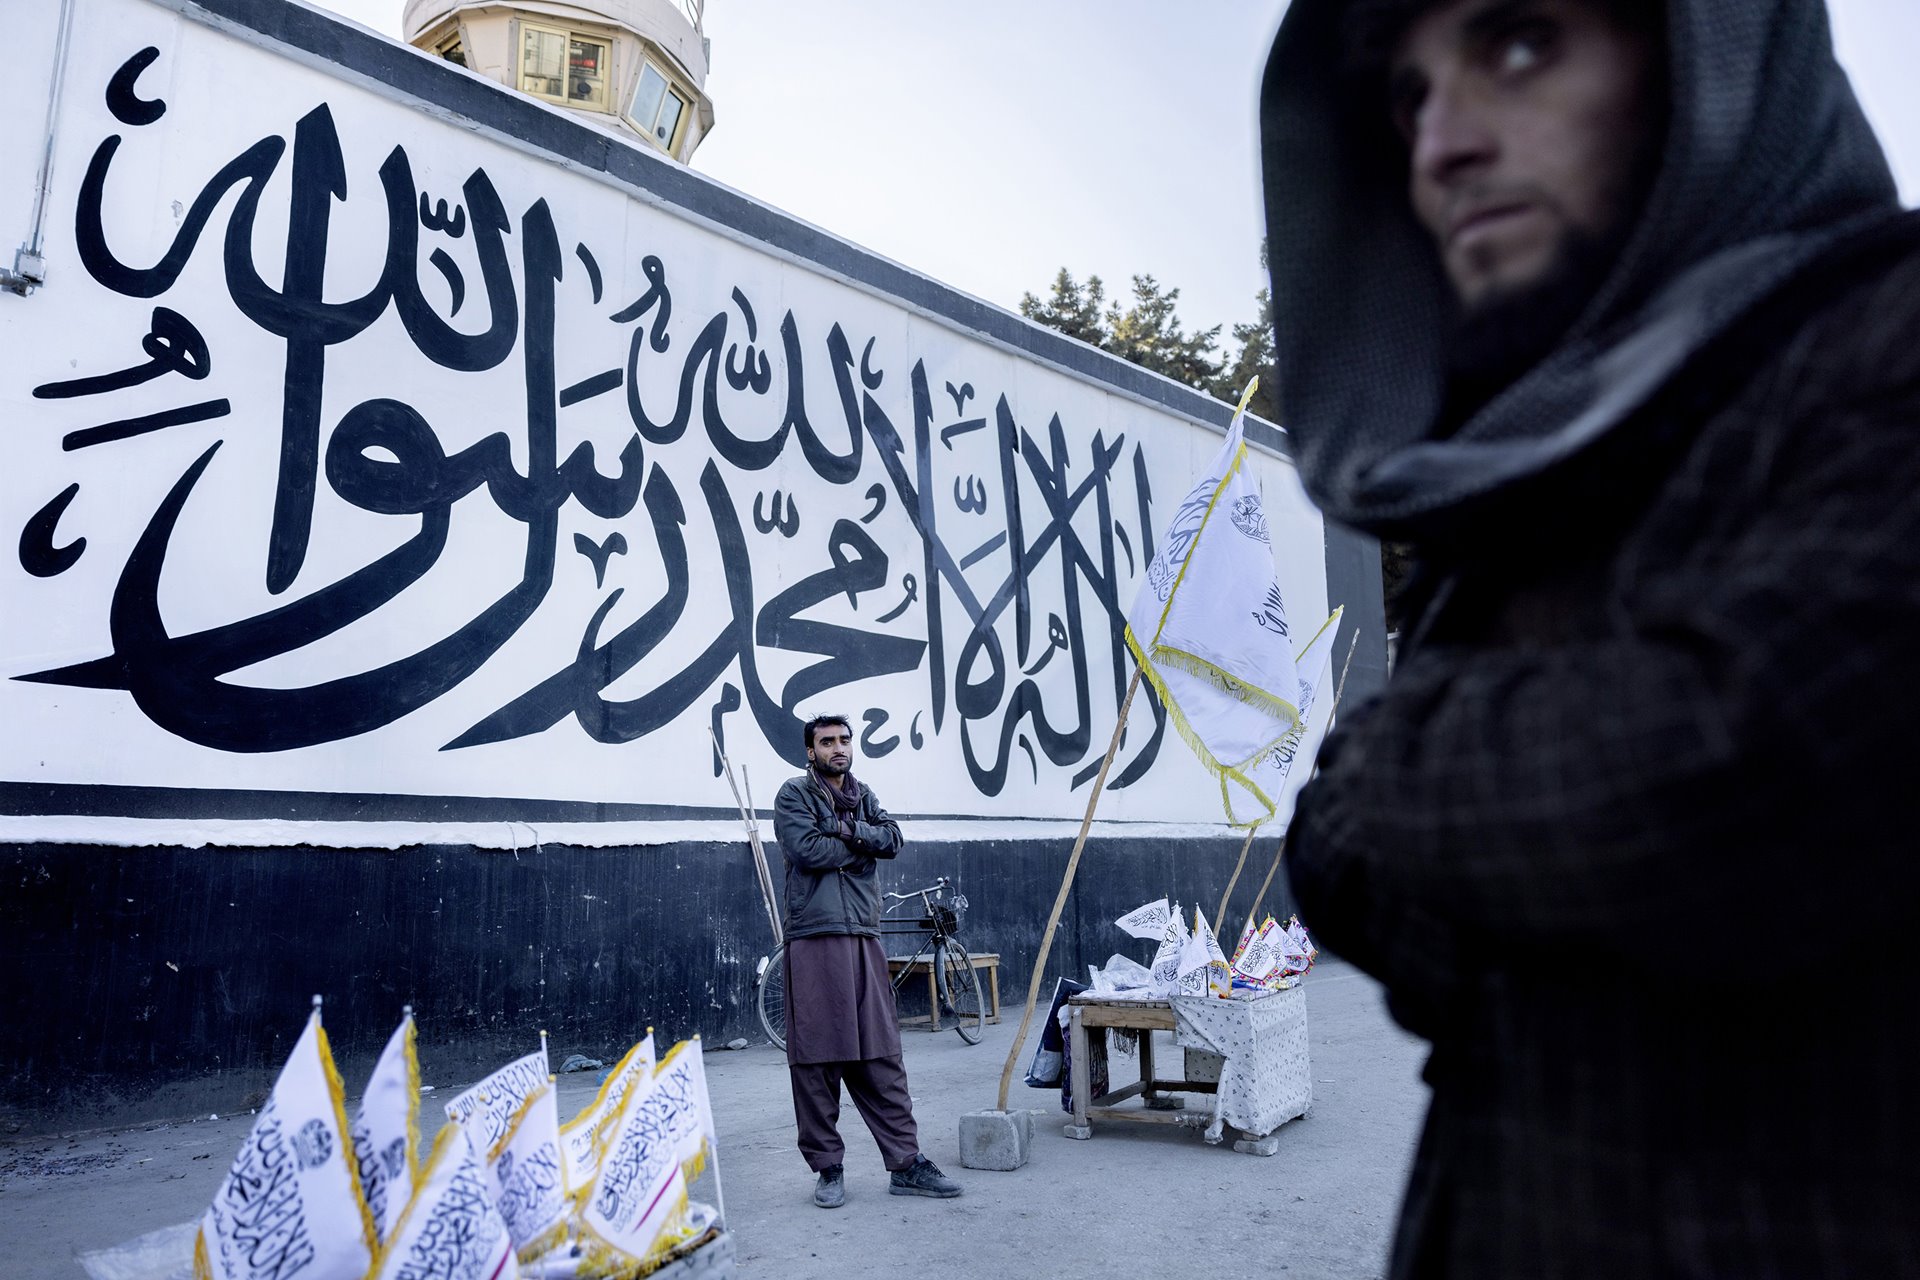 <p>The Islamic declaration of faith, &quot;There is no God but Allah, and Muhammad is His messenger&quot;, covers the wall of the former US Embassy in Kabul, Afghanistan.&nbsp;In front of the wall, street vendors sell Taliban flags and other merchandise. US diplomats negotiated with the Taliban in August 2021 to spare the embassy after the evacuation &nbsp;in exchange for future aid.</p>
